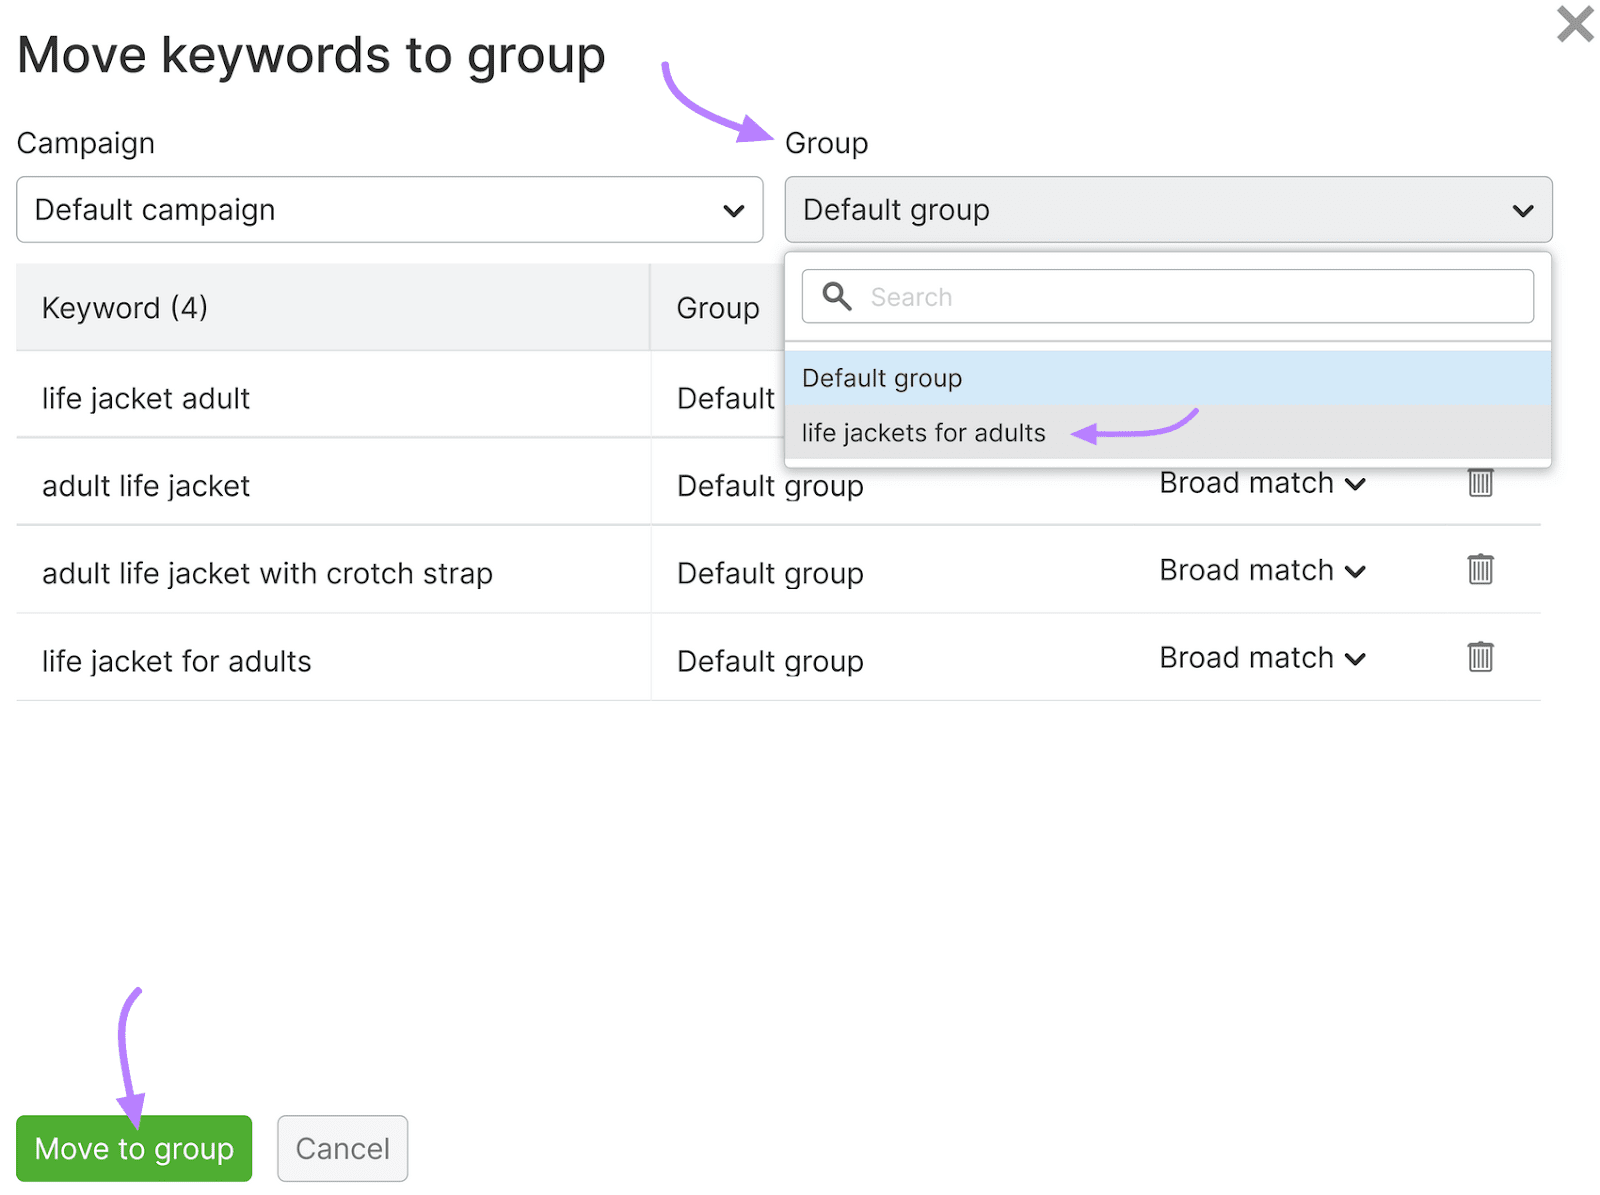 Popup for assigning keywords to groups in PPC Keyword Tool, with options to select a group and move keywords to the group.